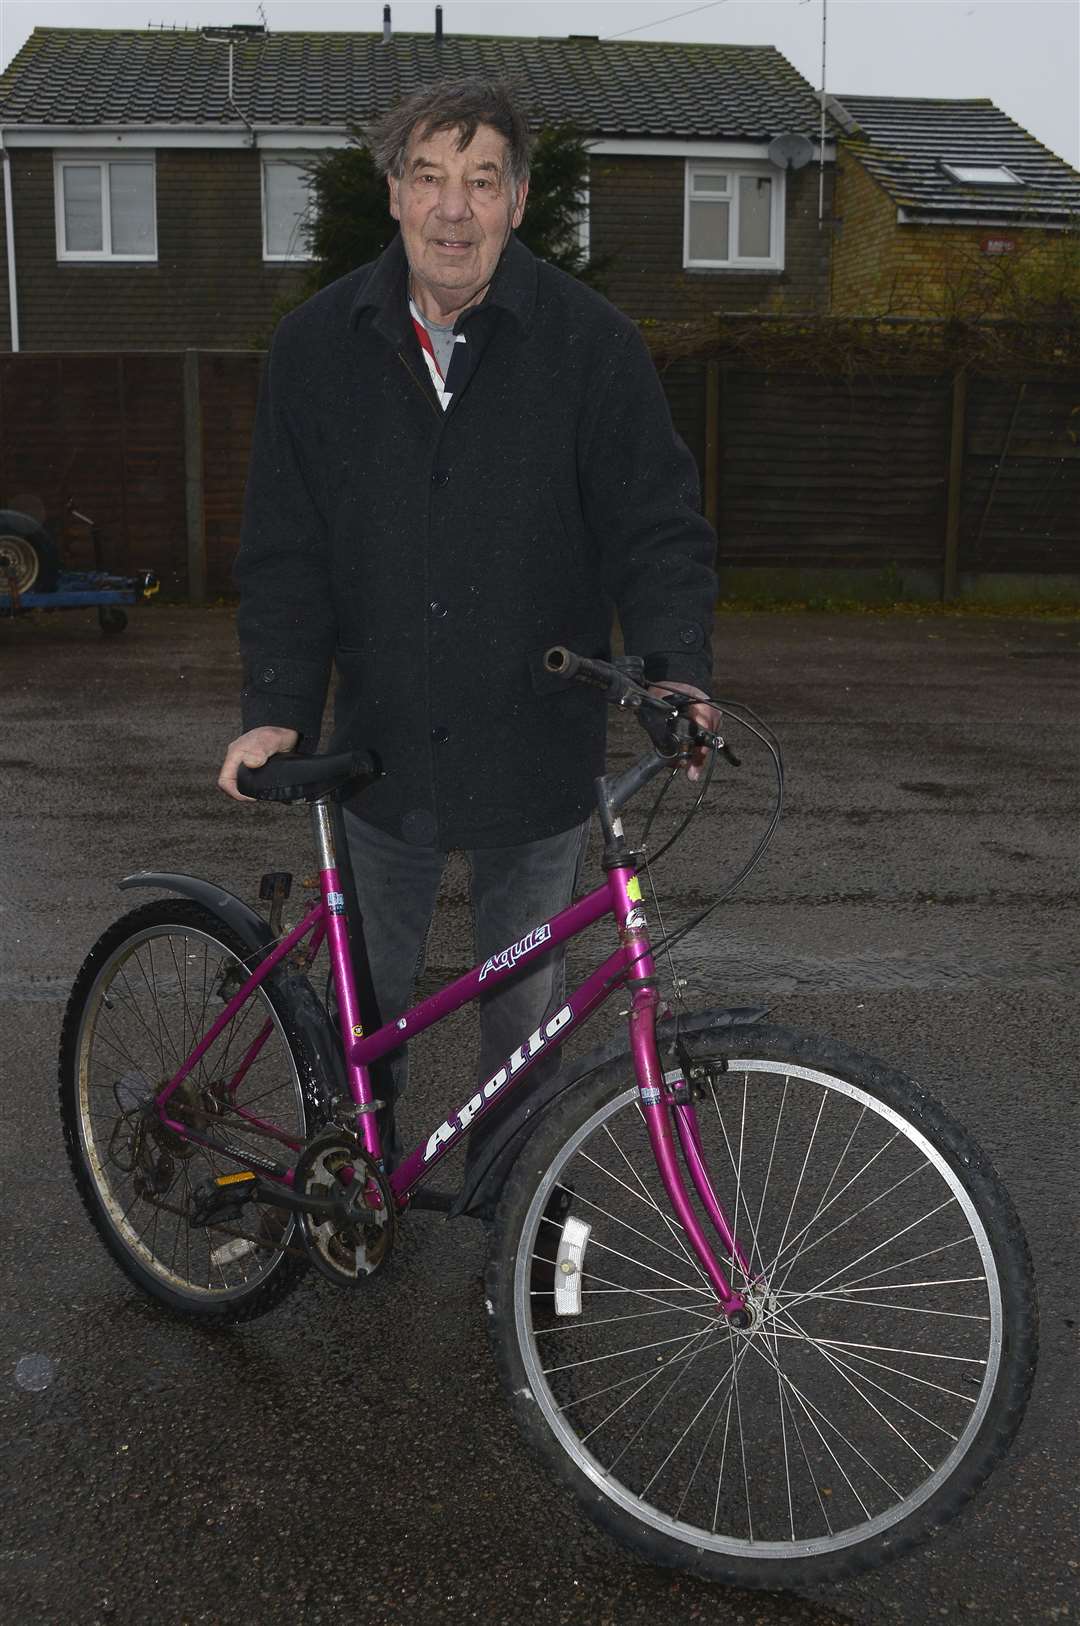 Michael Furness otherwise known as Mike the Bike with one of his recycled bikes